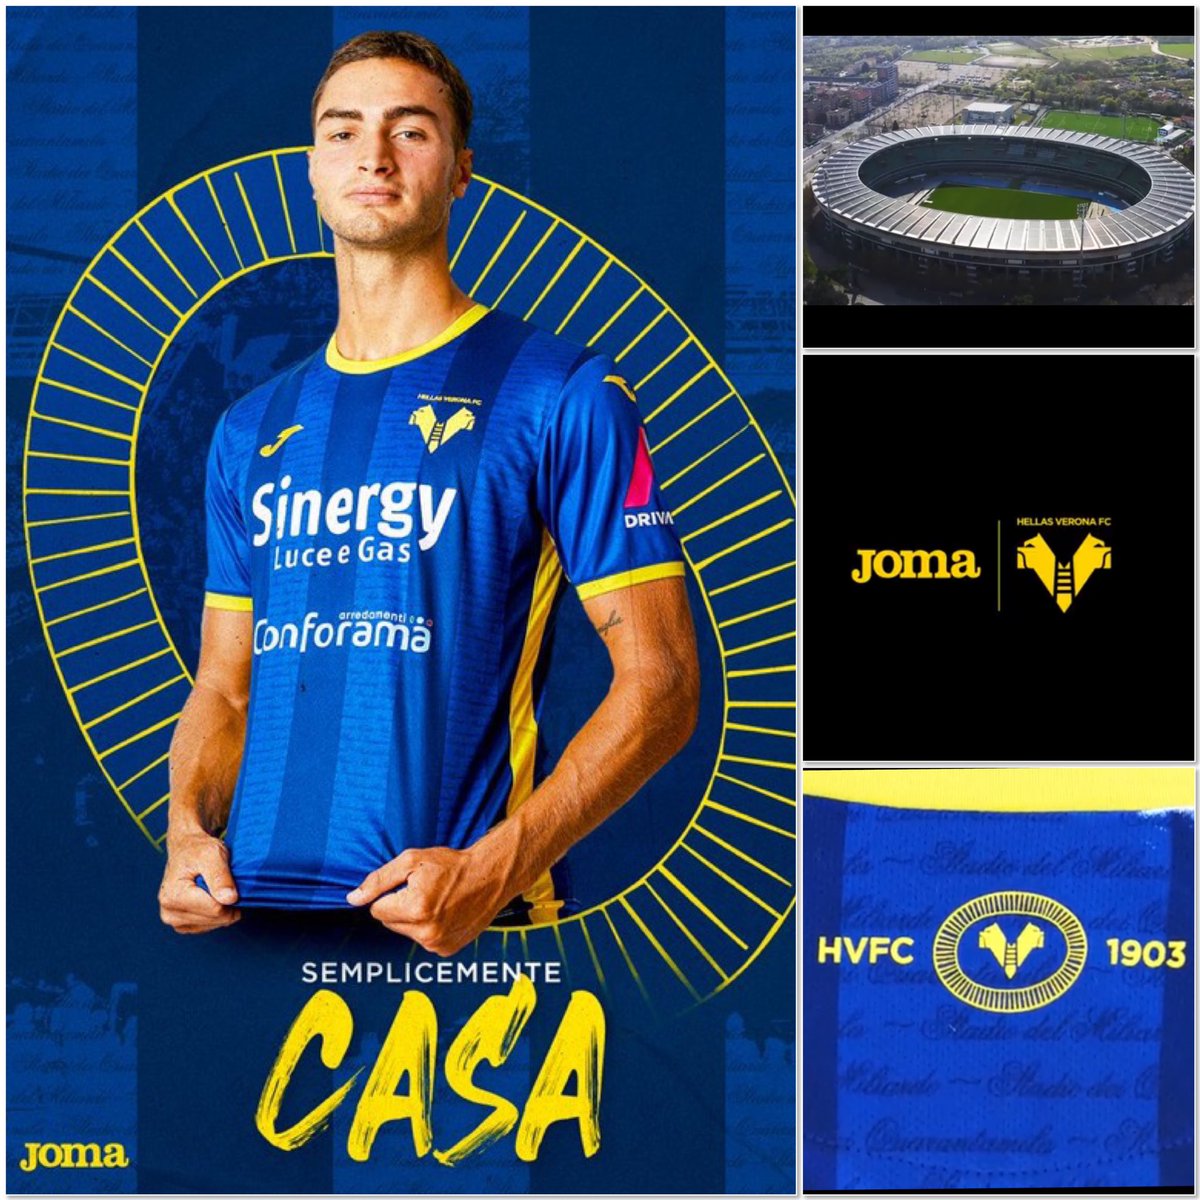 🟦🟨🟦 Hellas Verona 🟦🟨🟦 120 years old and this shirt celebrates 60 years at the Bentegodi Stadium 🏟 Decent debut with Joma…